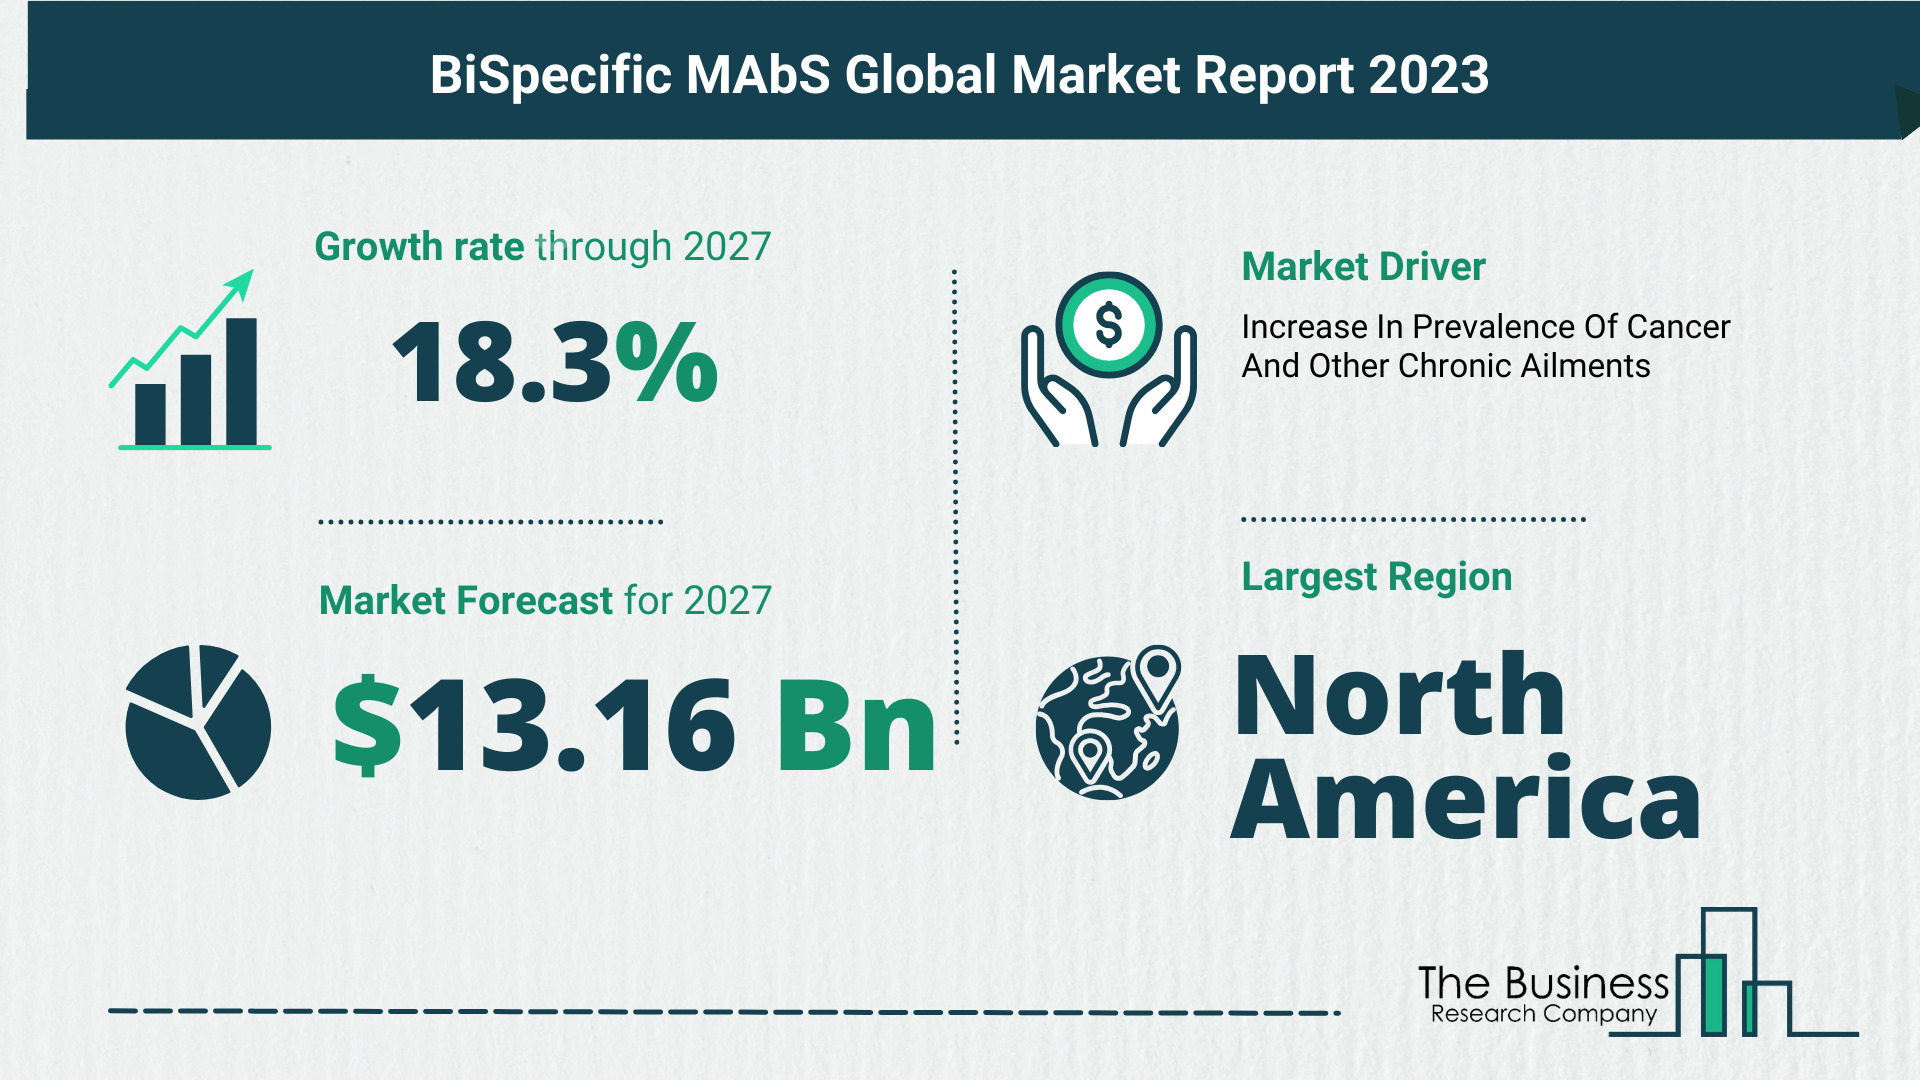 Key Trends And Drivers In The BiSpecific MAbS Market 2023